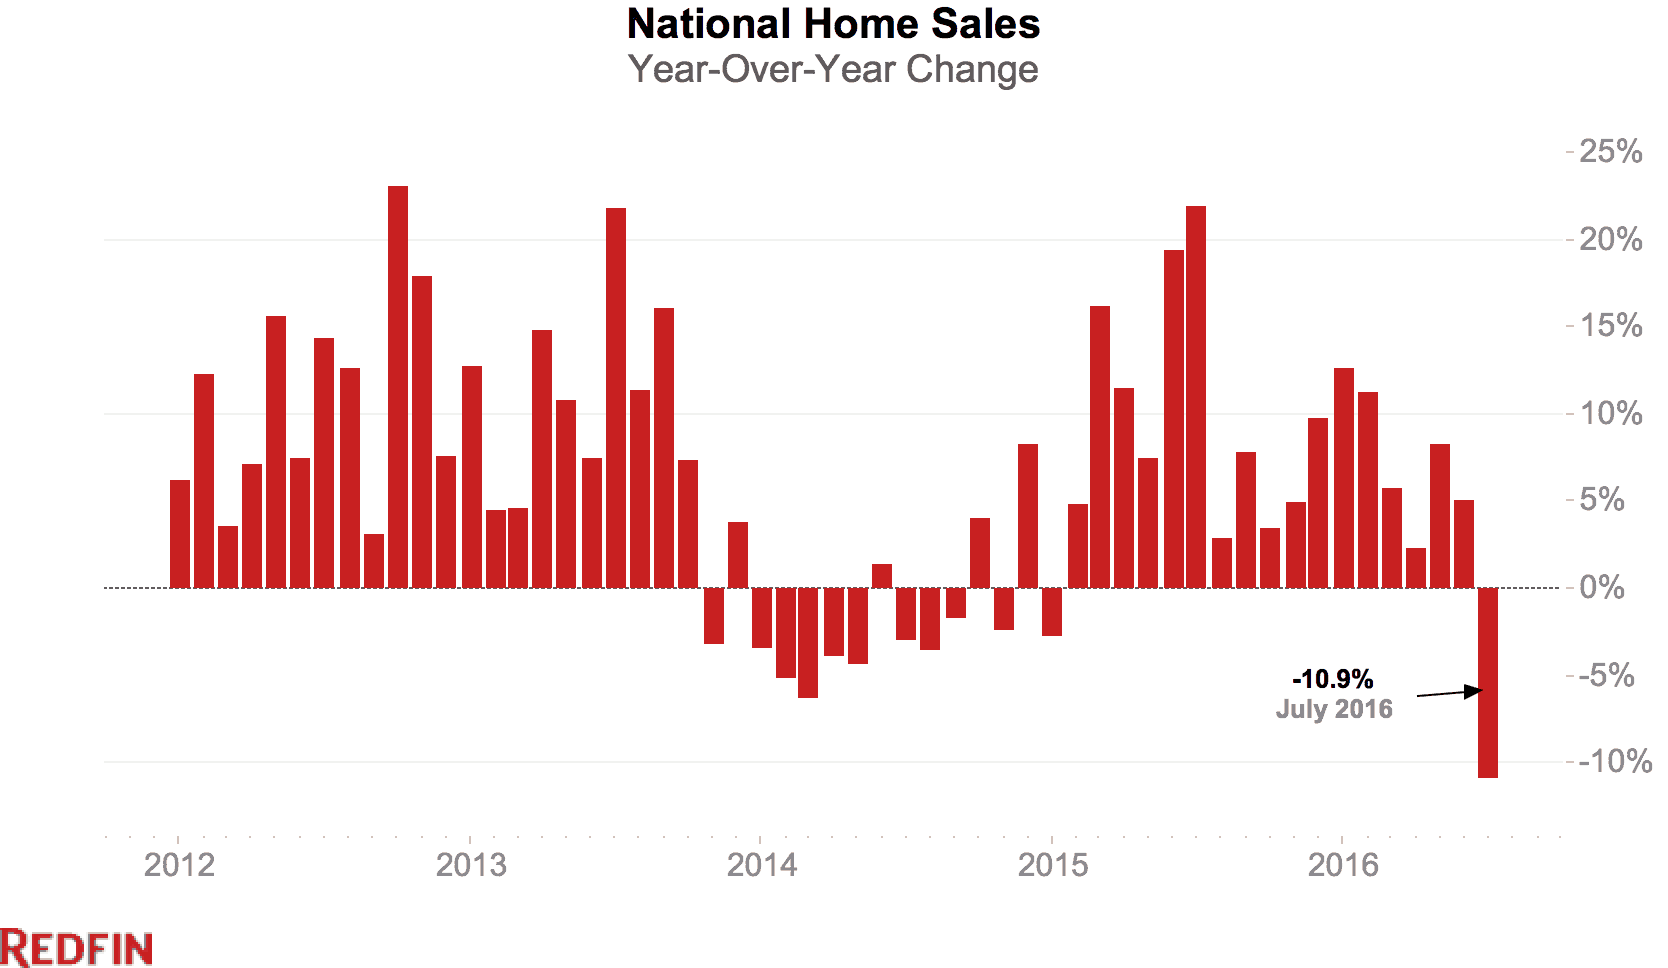 National Home Sales year-over-year